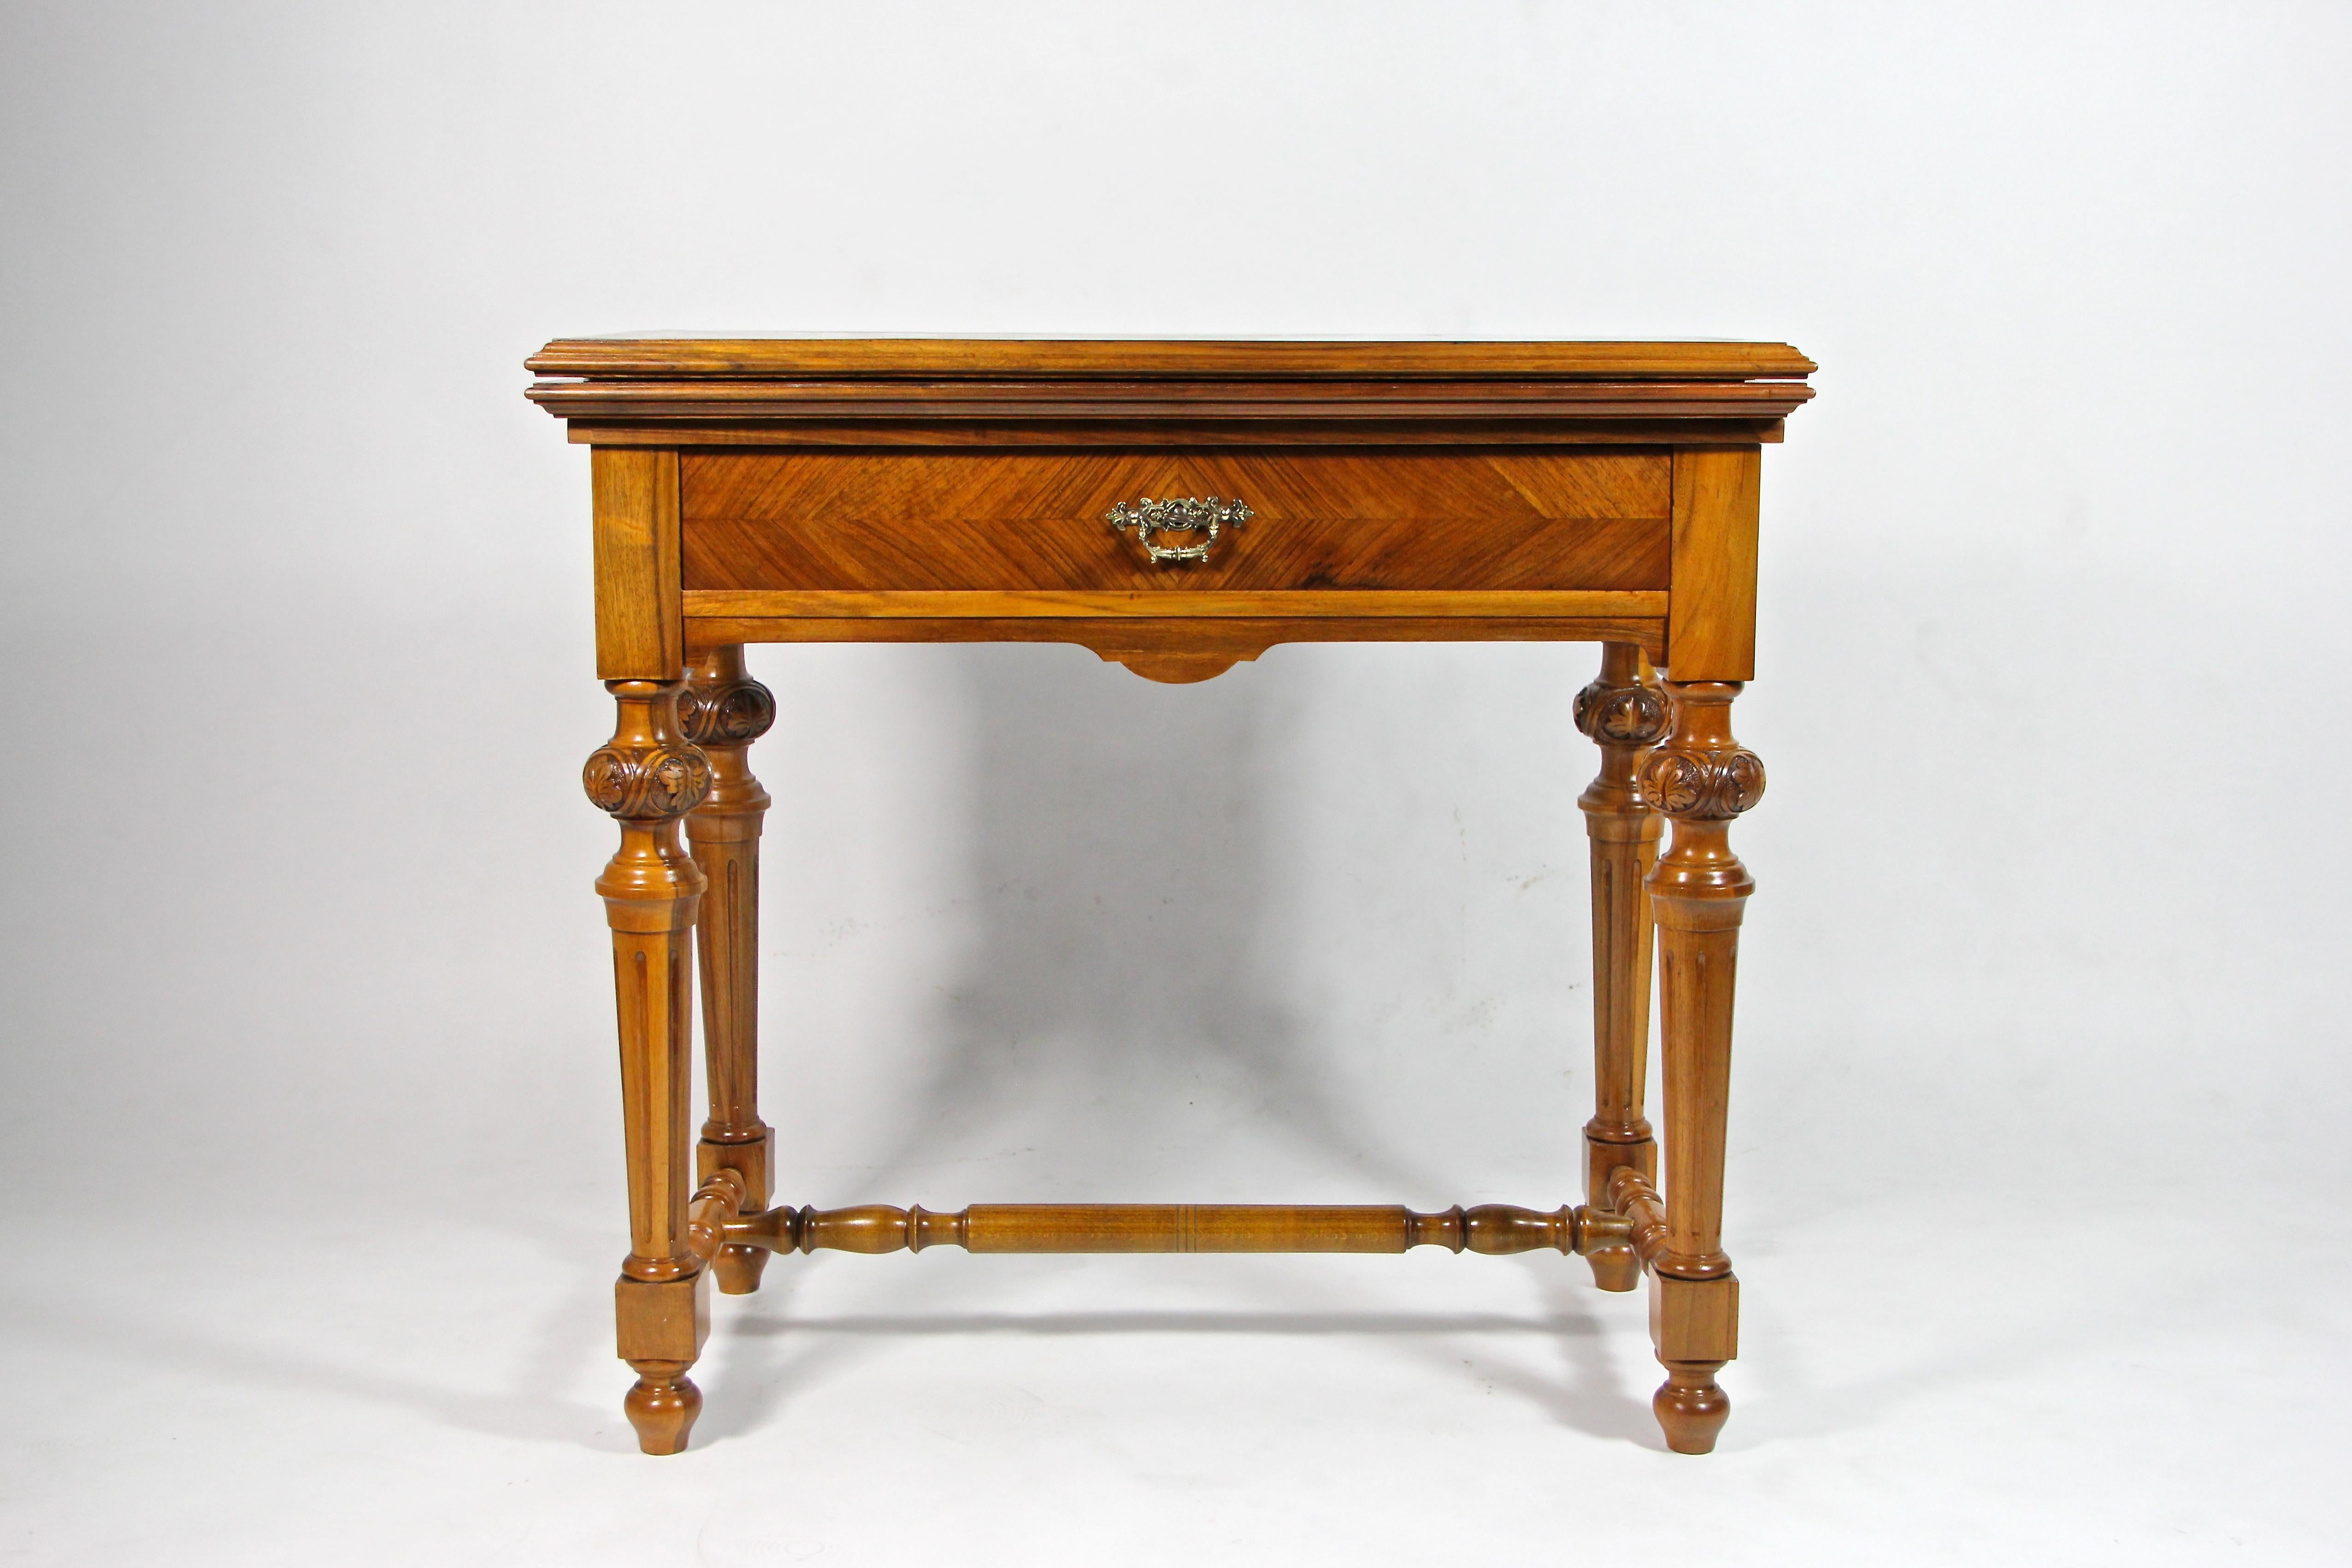 Wonderful console/ gaming table from the late 19th century, circa 1870, the so-called Historism period in Austria. Made of spruce wood and veneered with beautiful nut wood in a great technique - the so called 